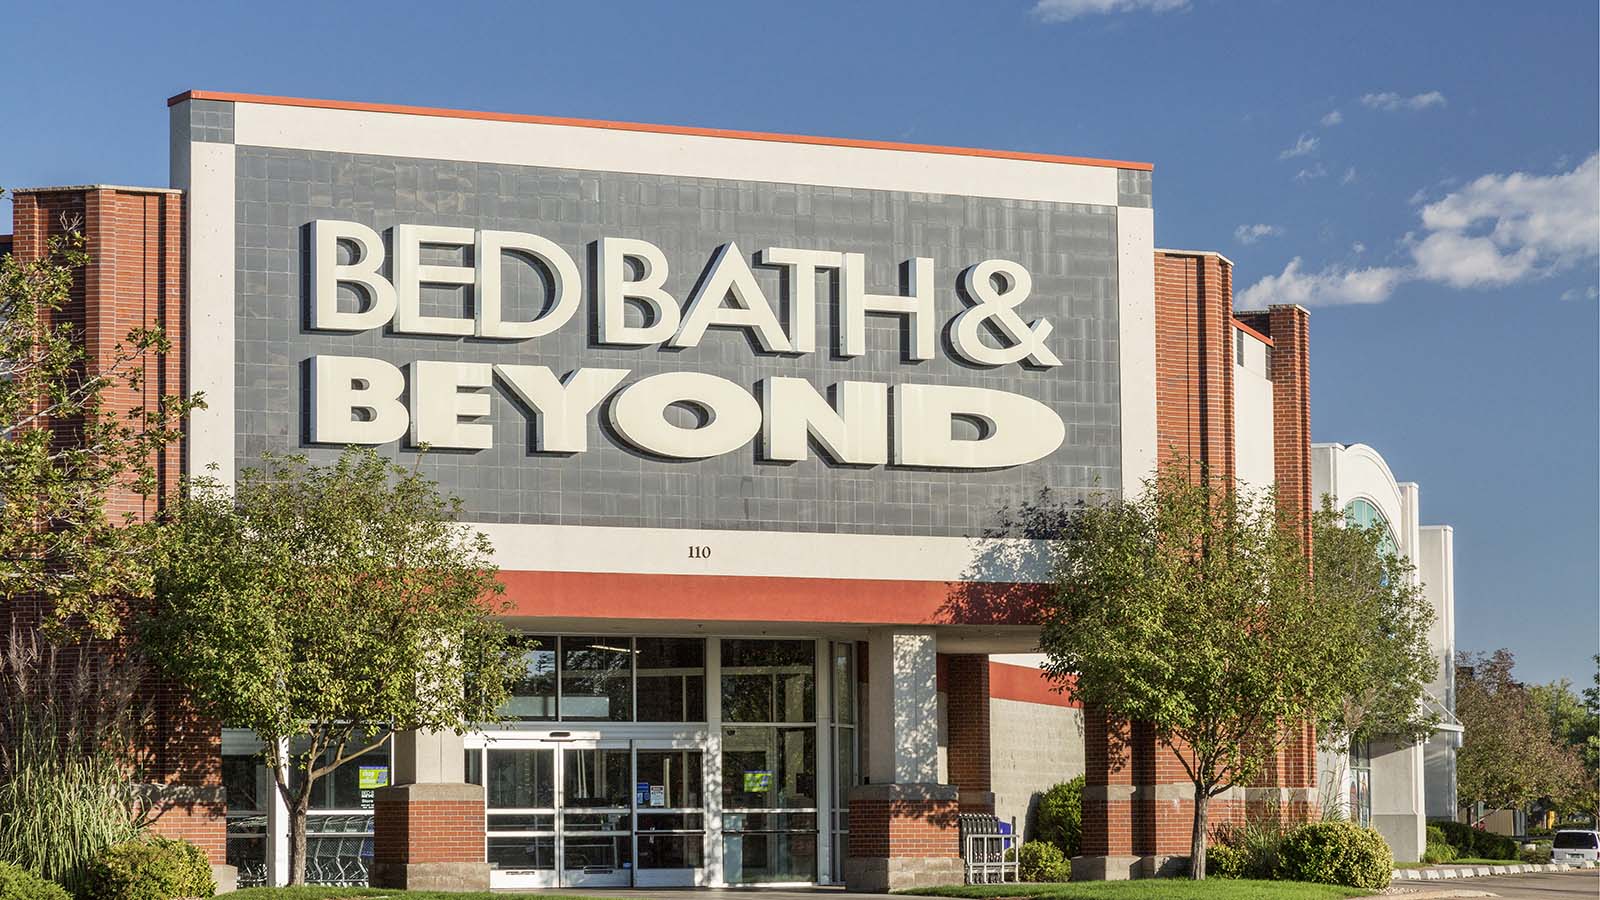 Bed, Bath & Beyond (BBBY) storefront with trees in front